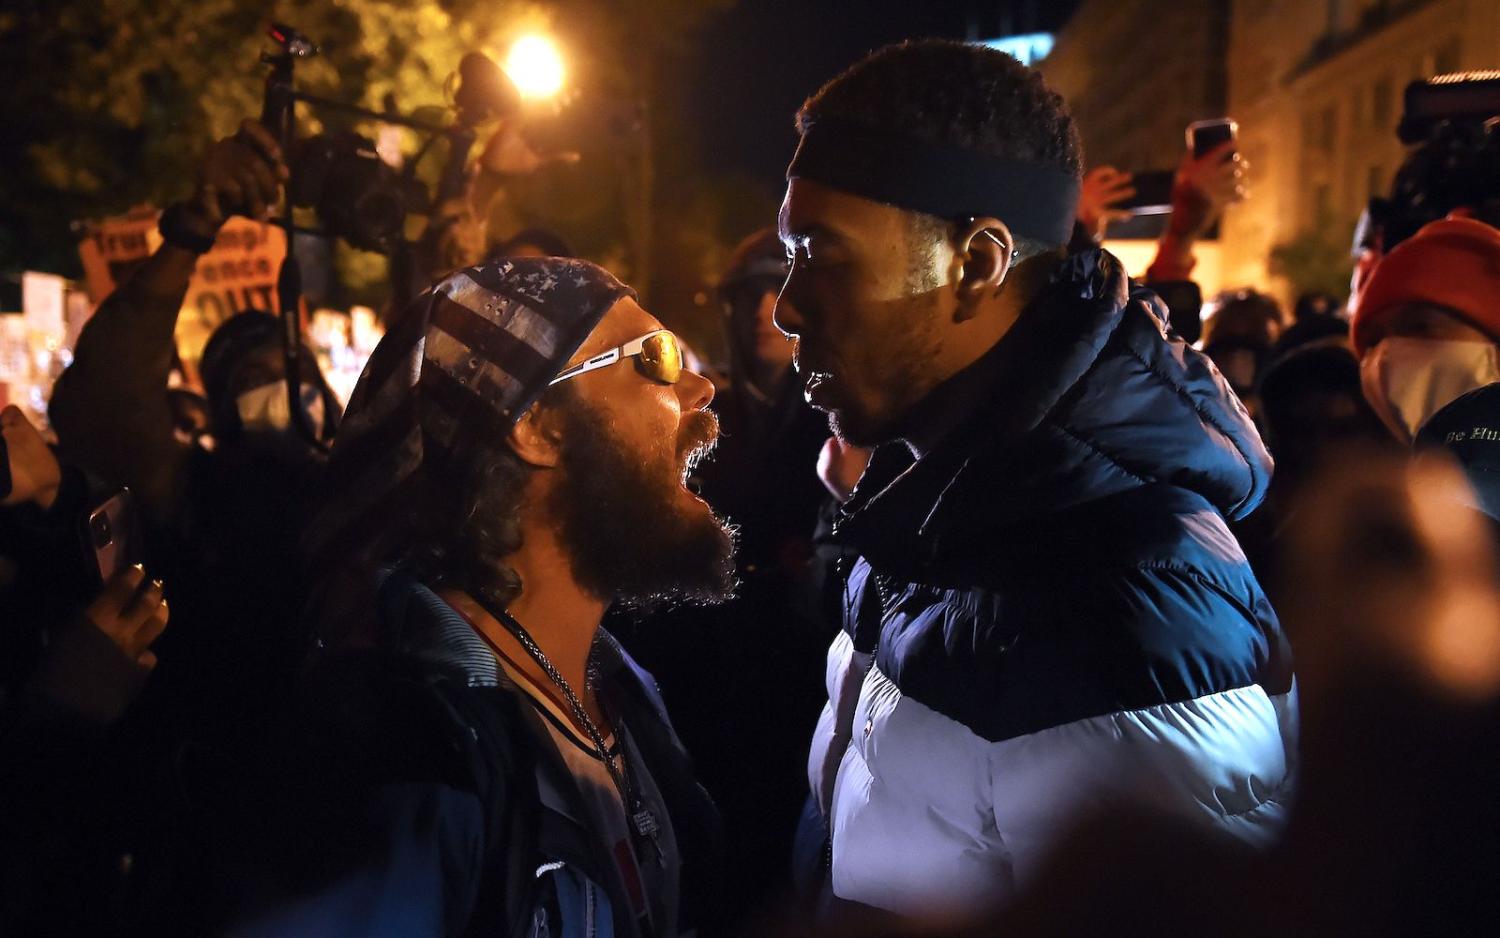 A Trump supporter (left) clashes with a demonstrator at Black Lives Matter plaza, across from the White House in Washington, DC, on 3 November 2020 (Olivier Douliery/AFP via Getty Images)